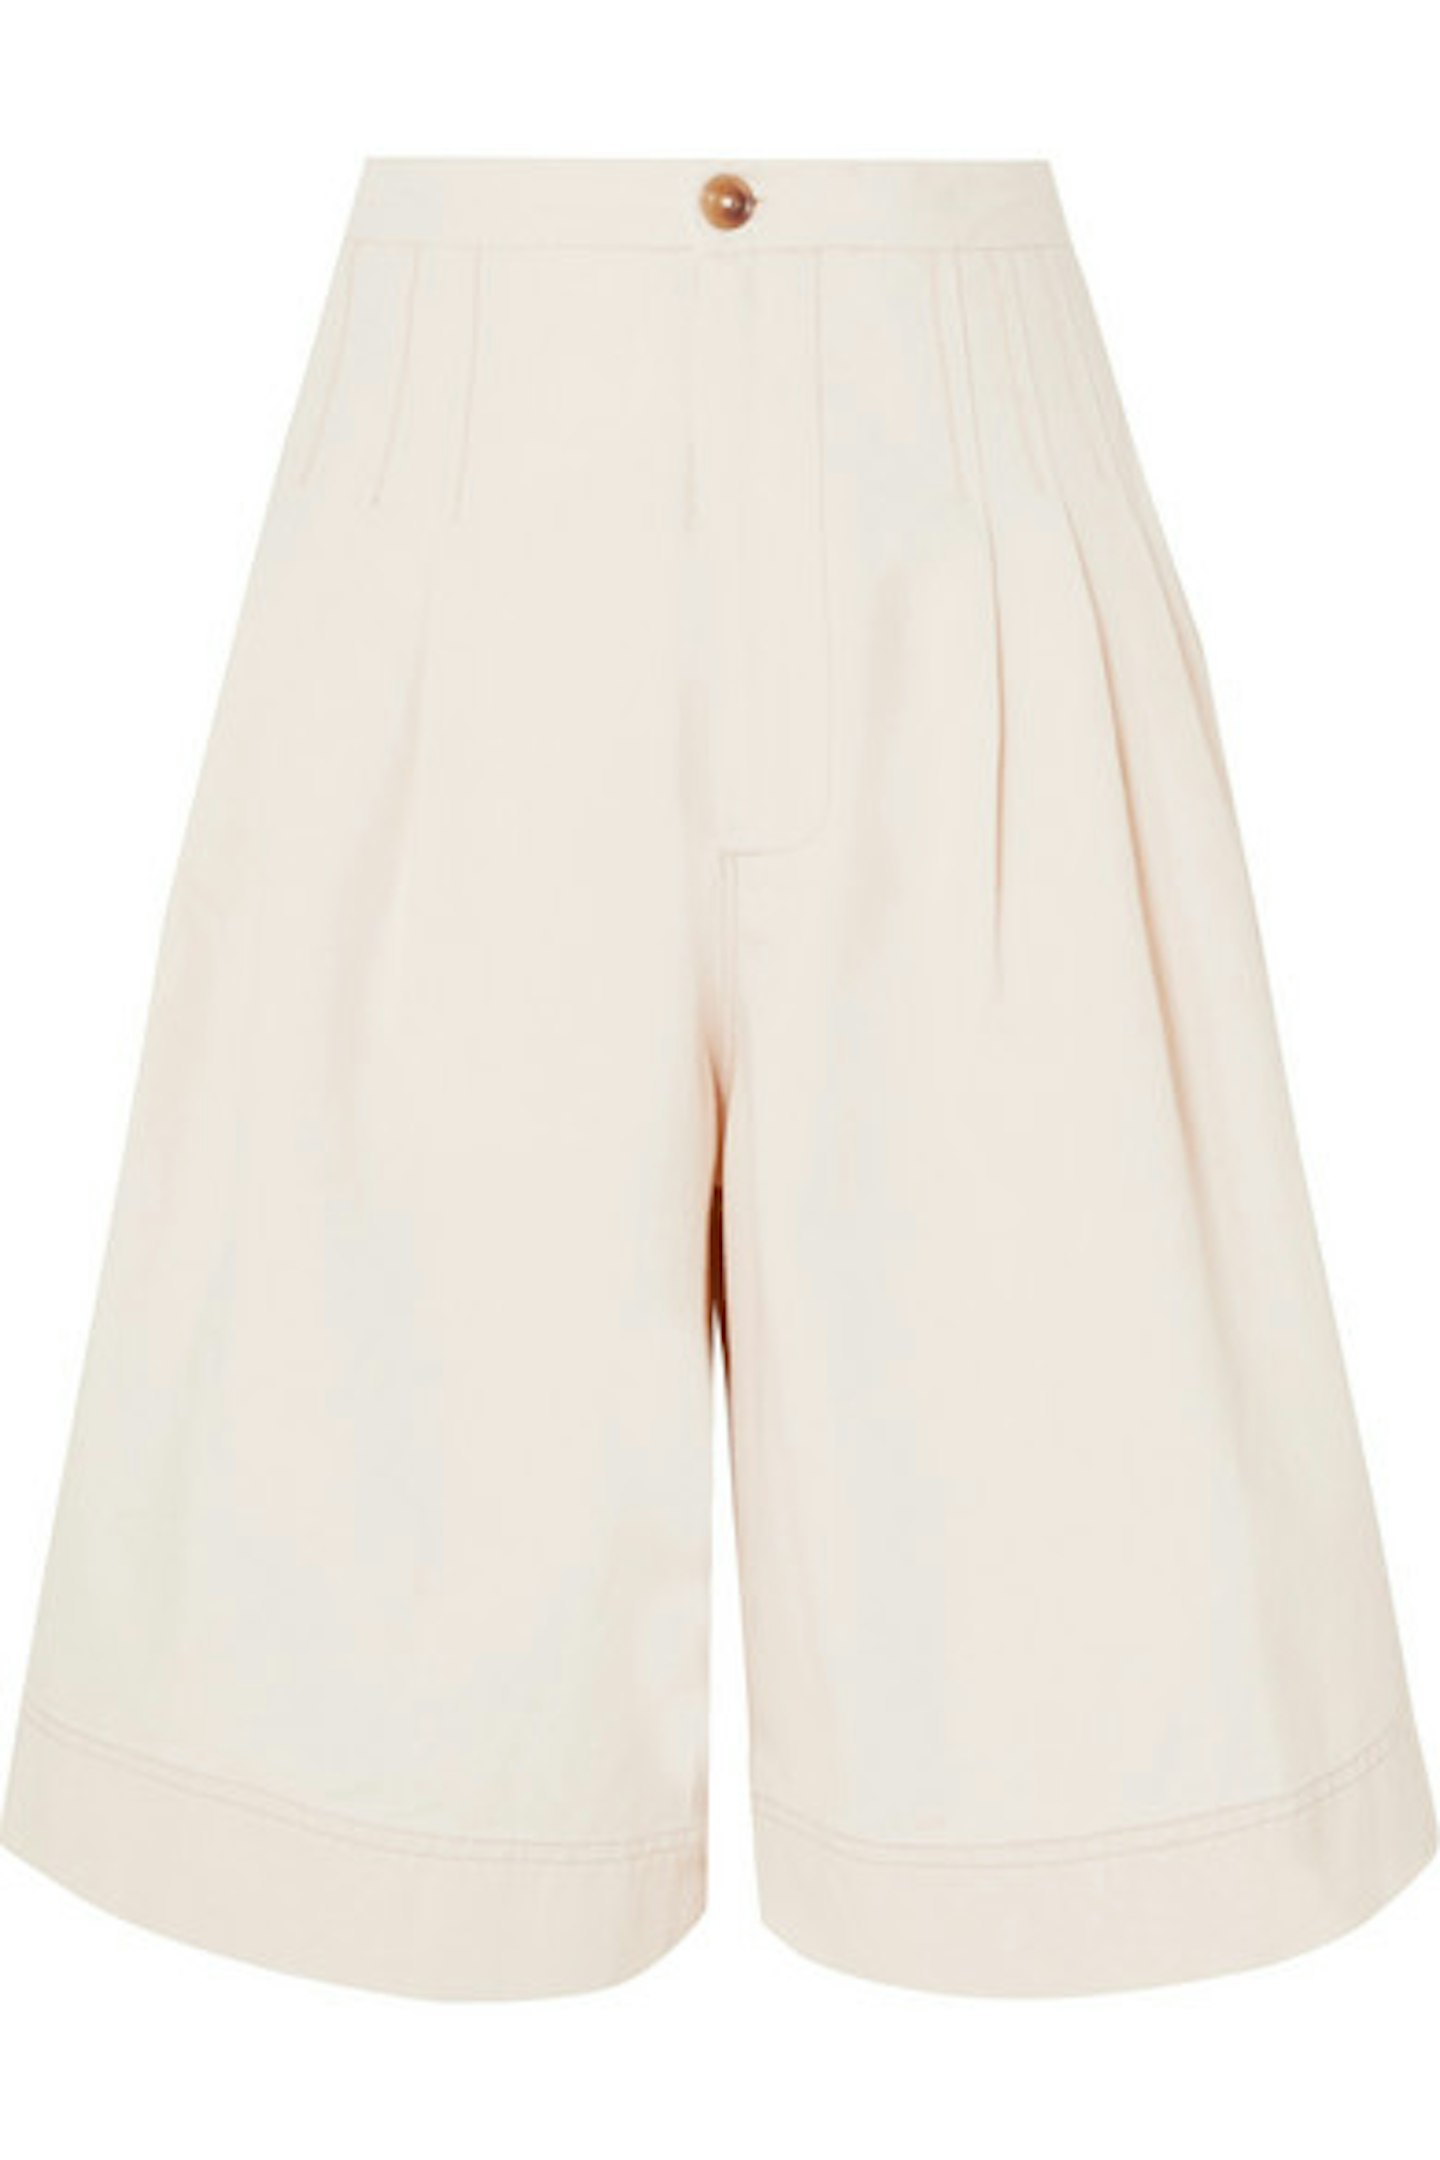 Bassike, Pleated Cotton Shorts, £248